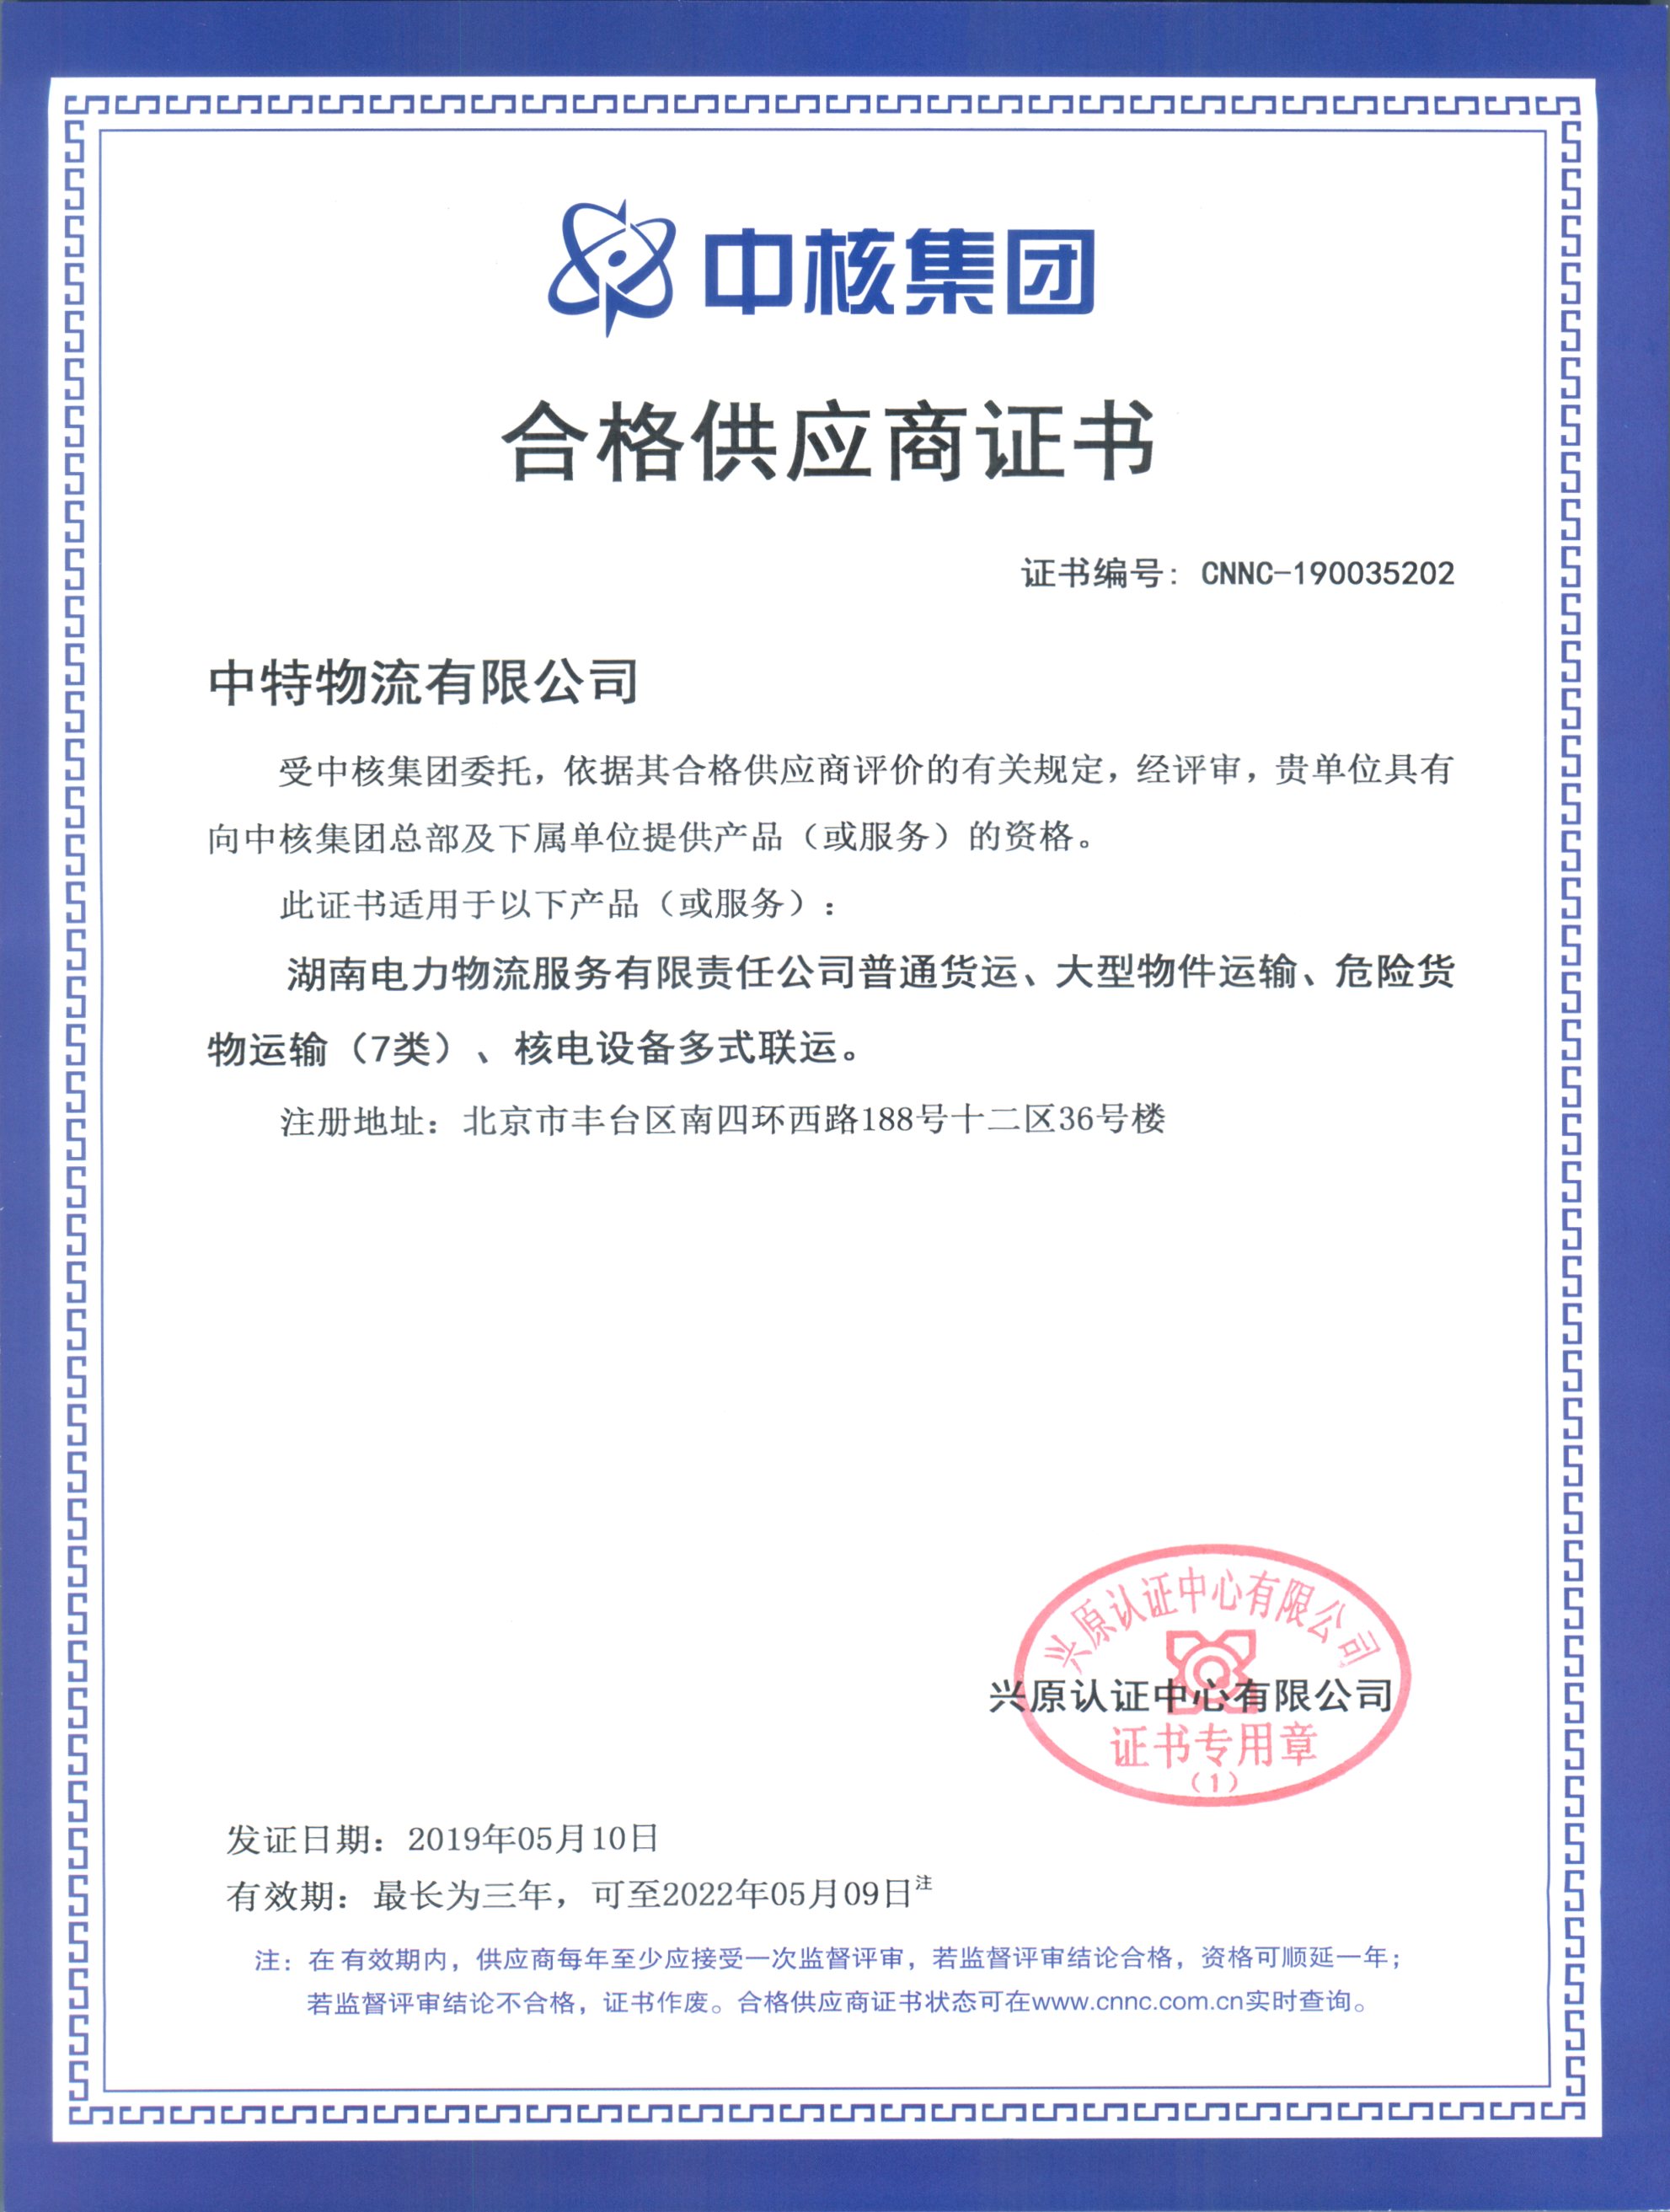 Certificate of Qualified Supplier